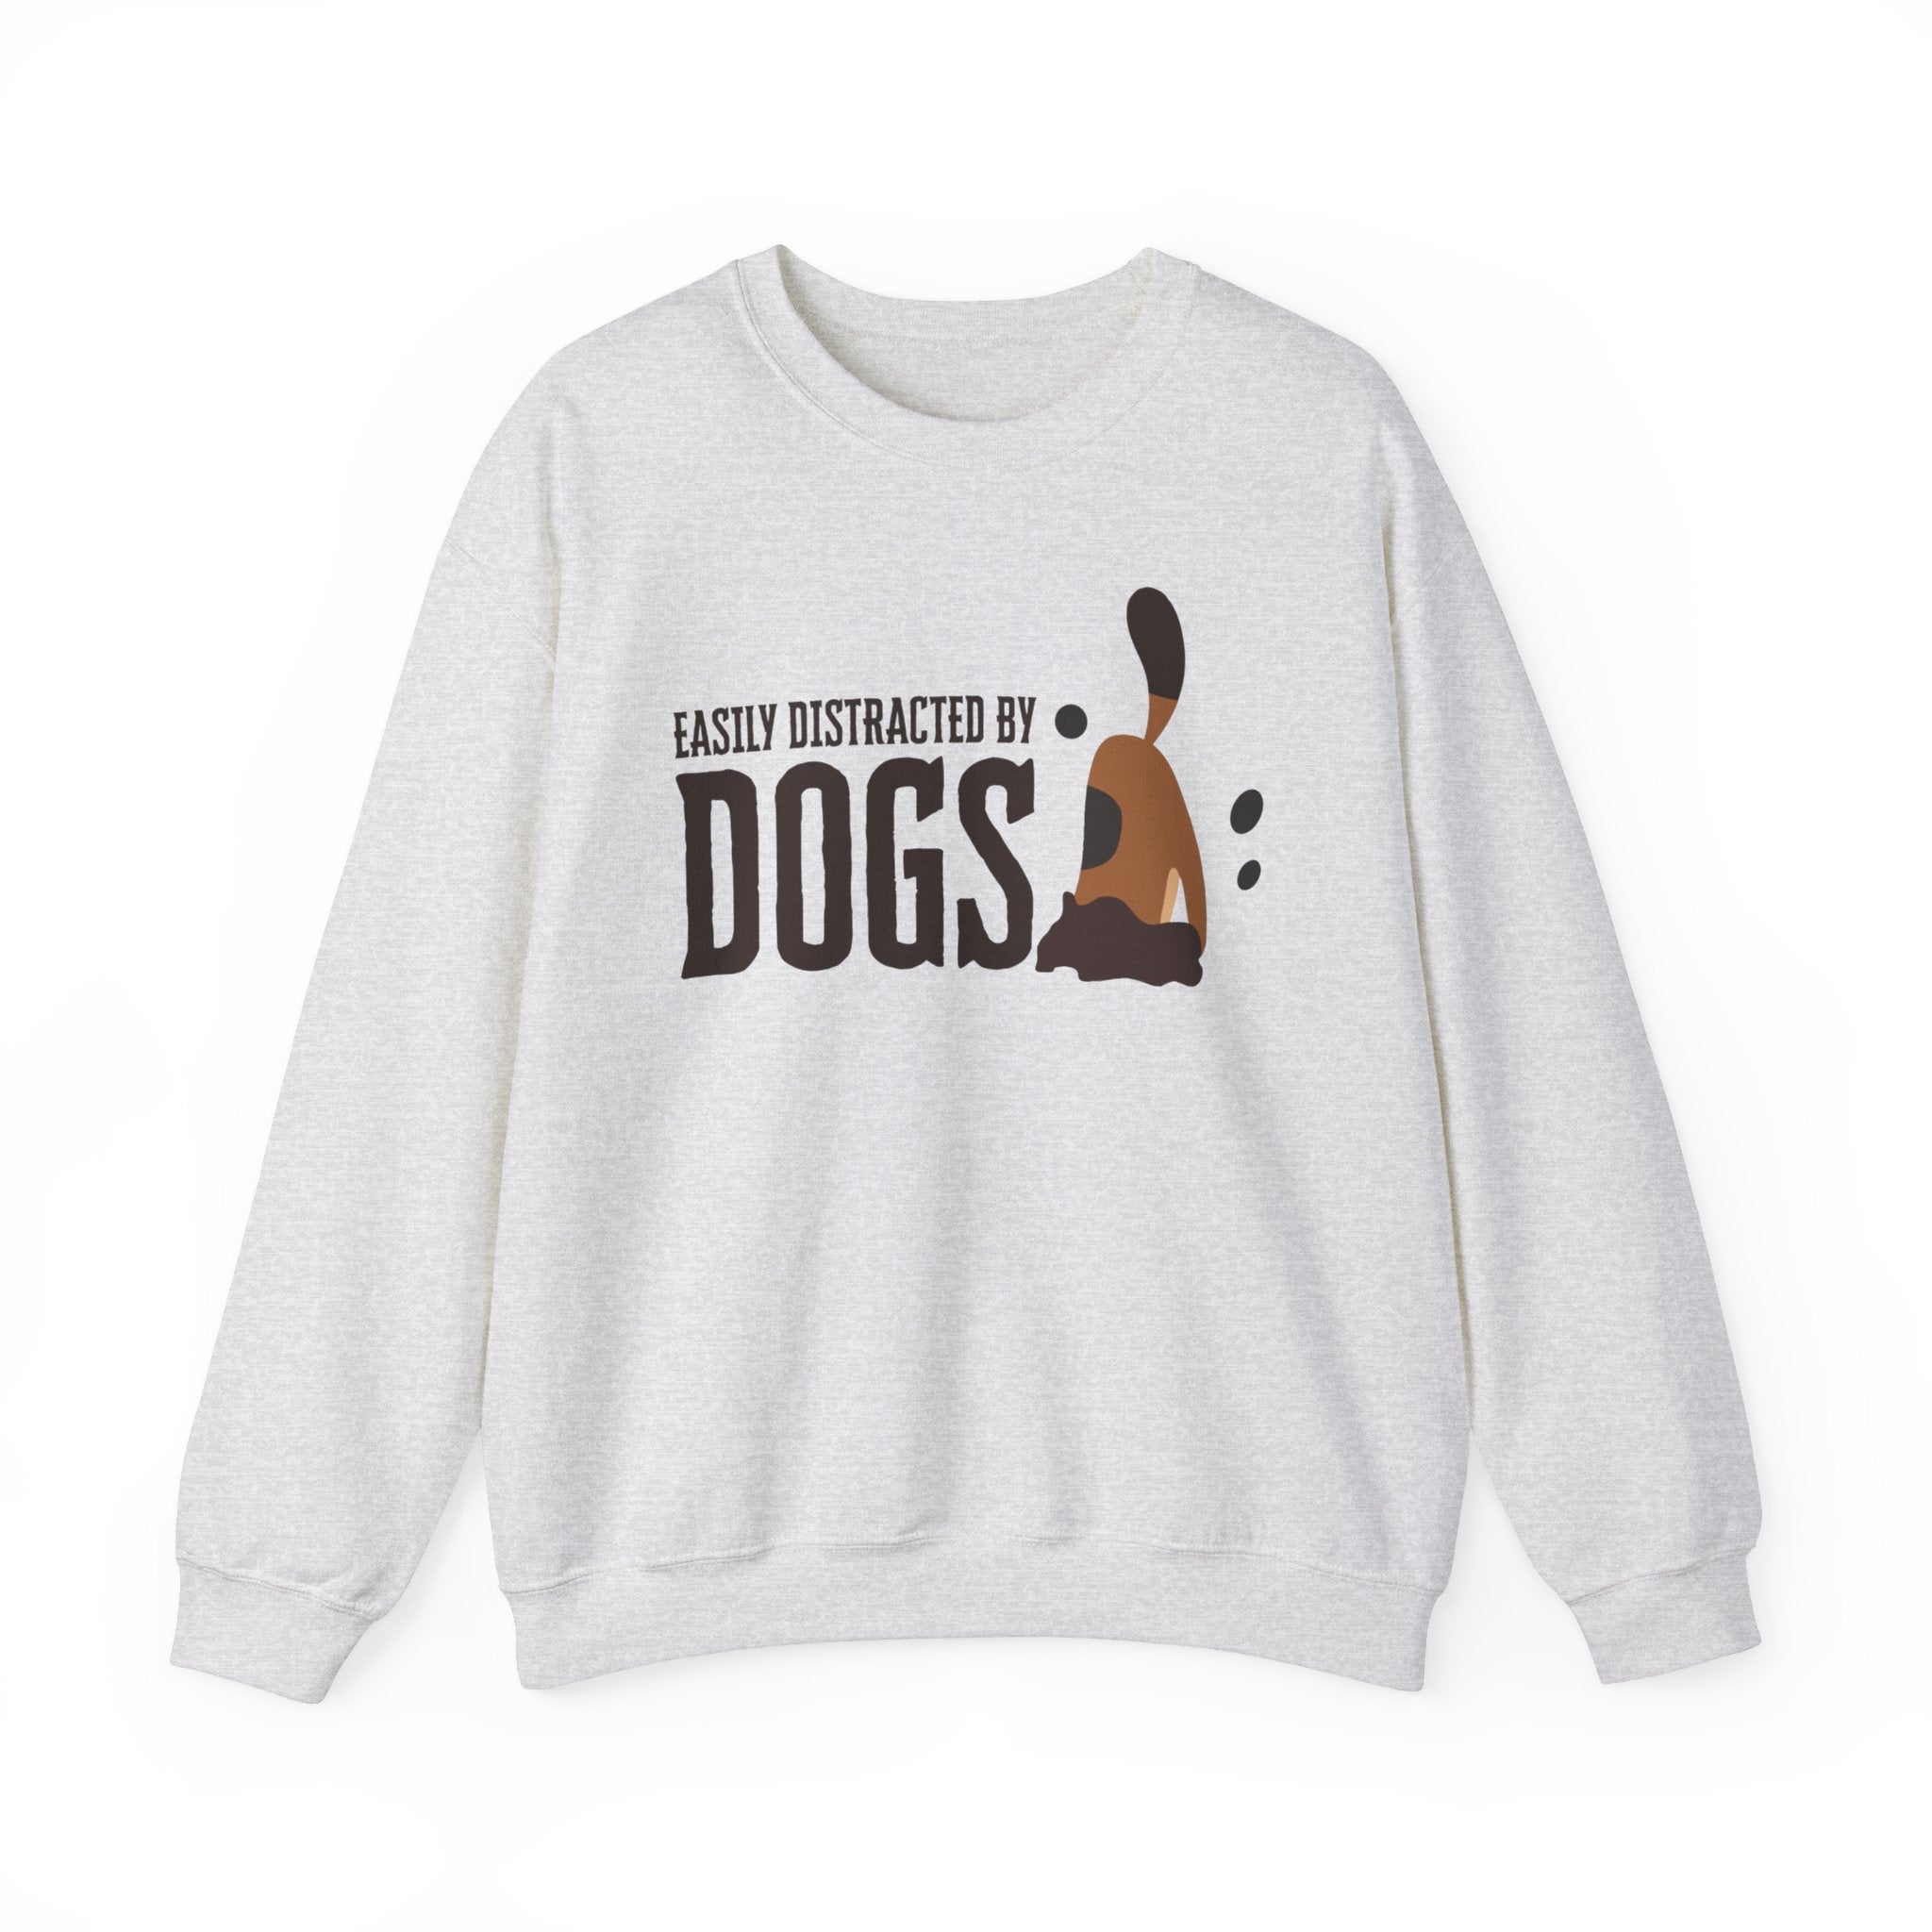 An ash-colored ‘Dogs Pure Love, Dog Dig’ unisex sweatshirt spotlights a dog digging with the slogan ‘Easily Distracted by Dogs,’ against a white background.